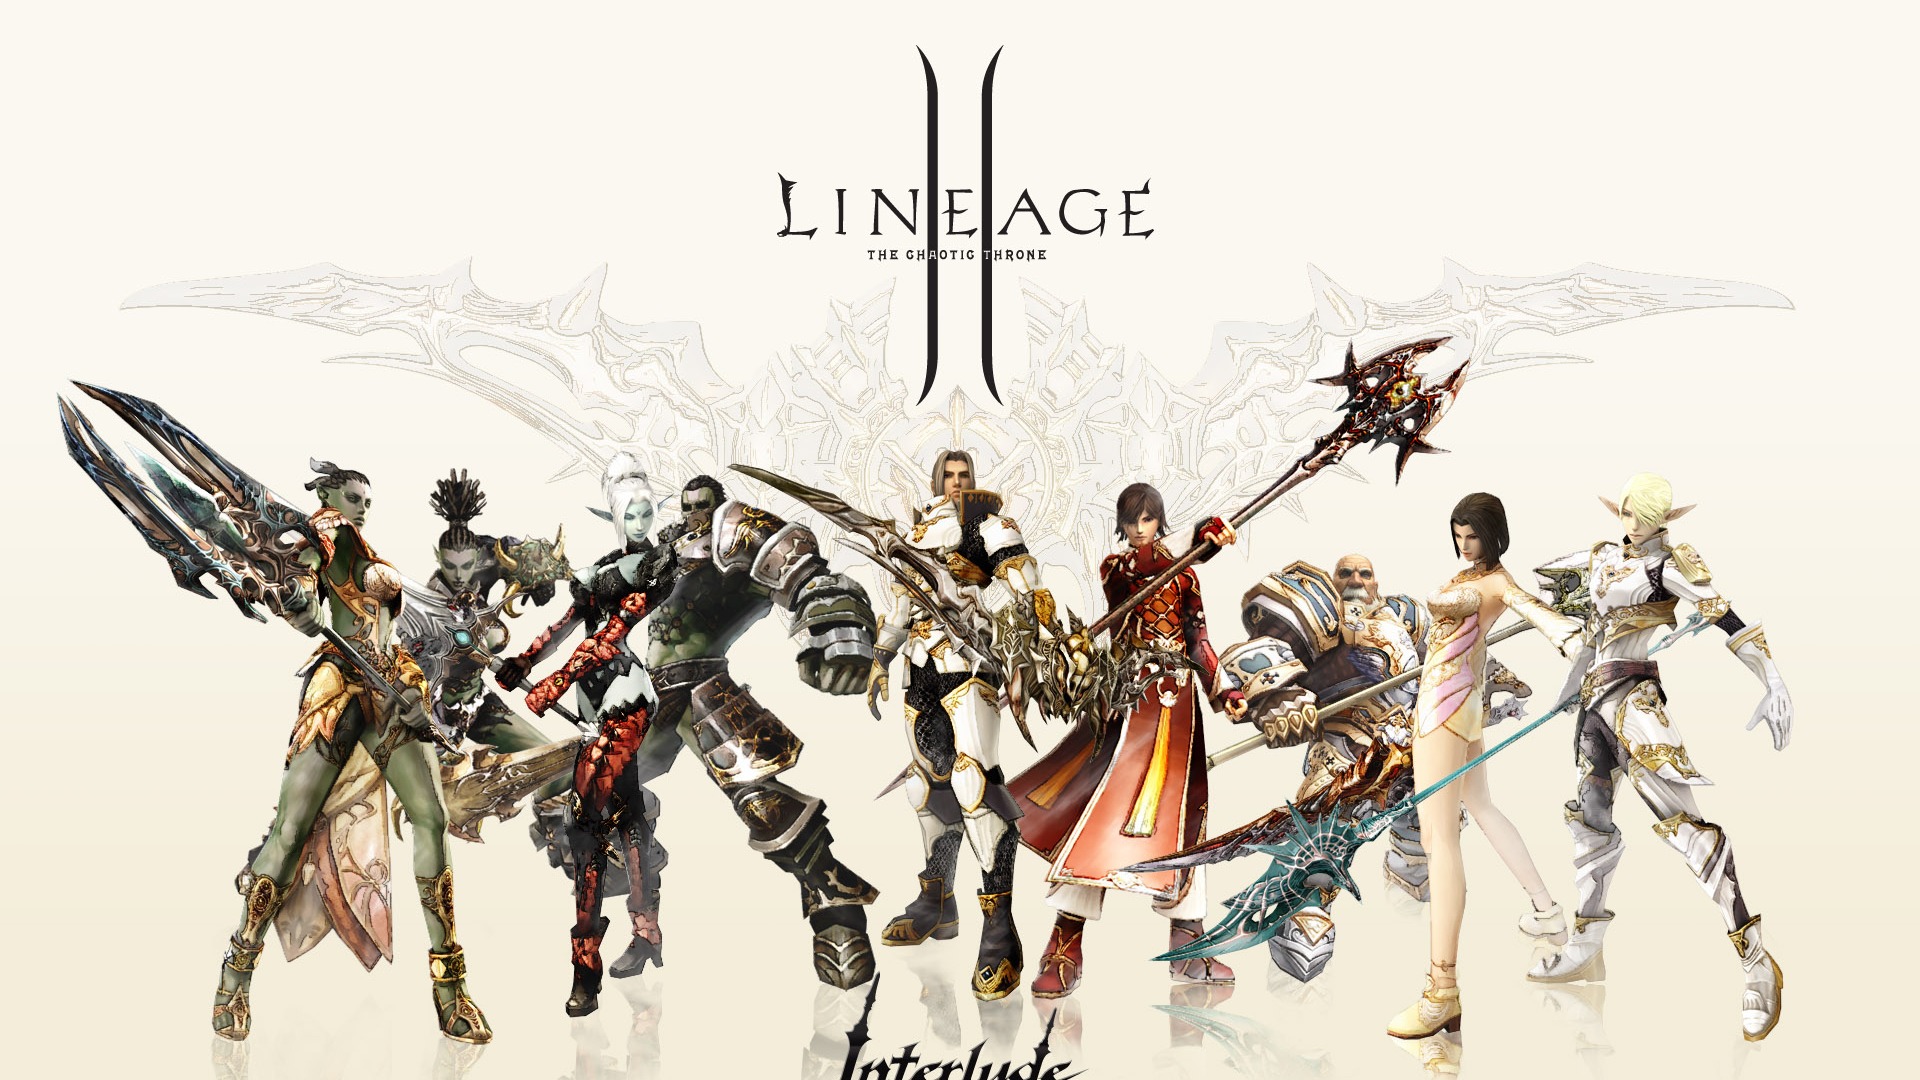 LINEAGE Ⅱ modeling HD gaming wallpapers #8 - 1920x1080